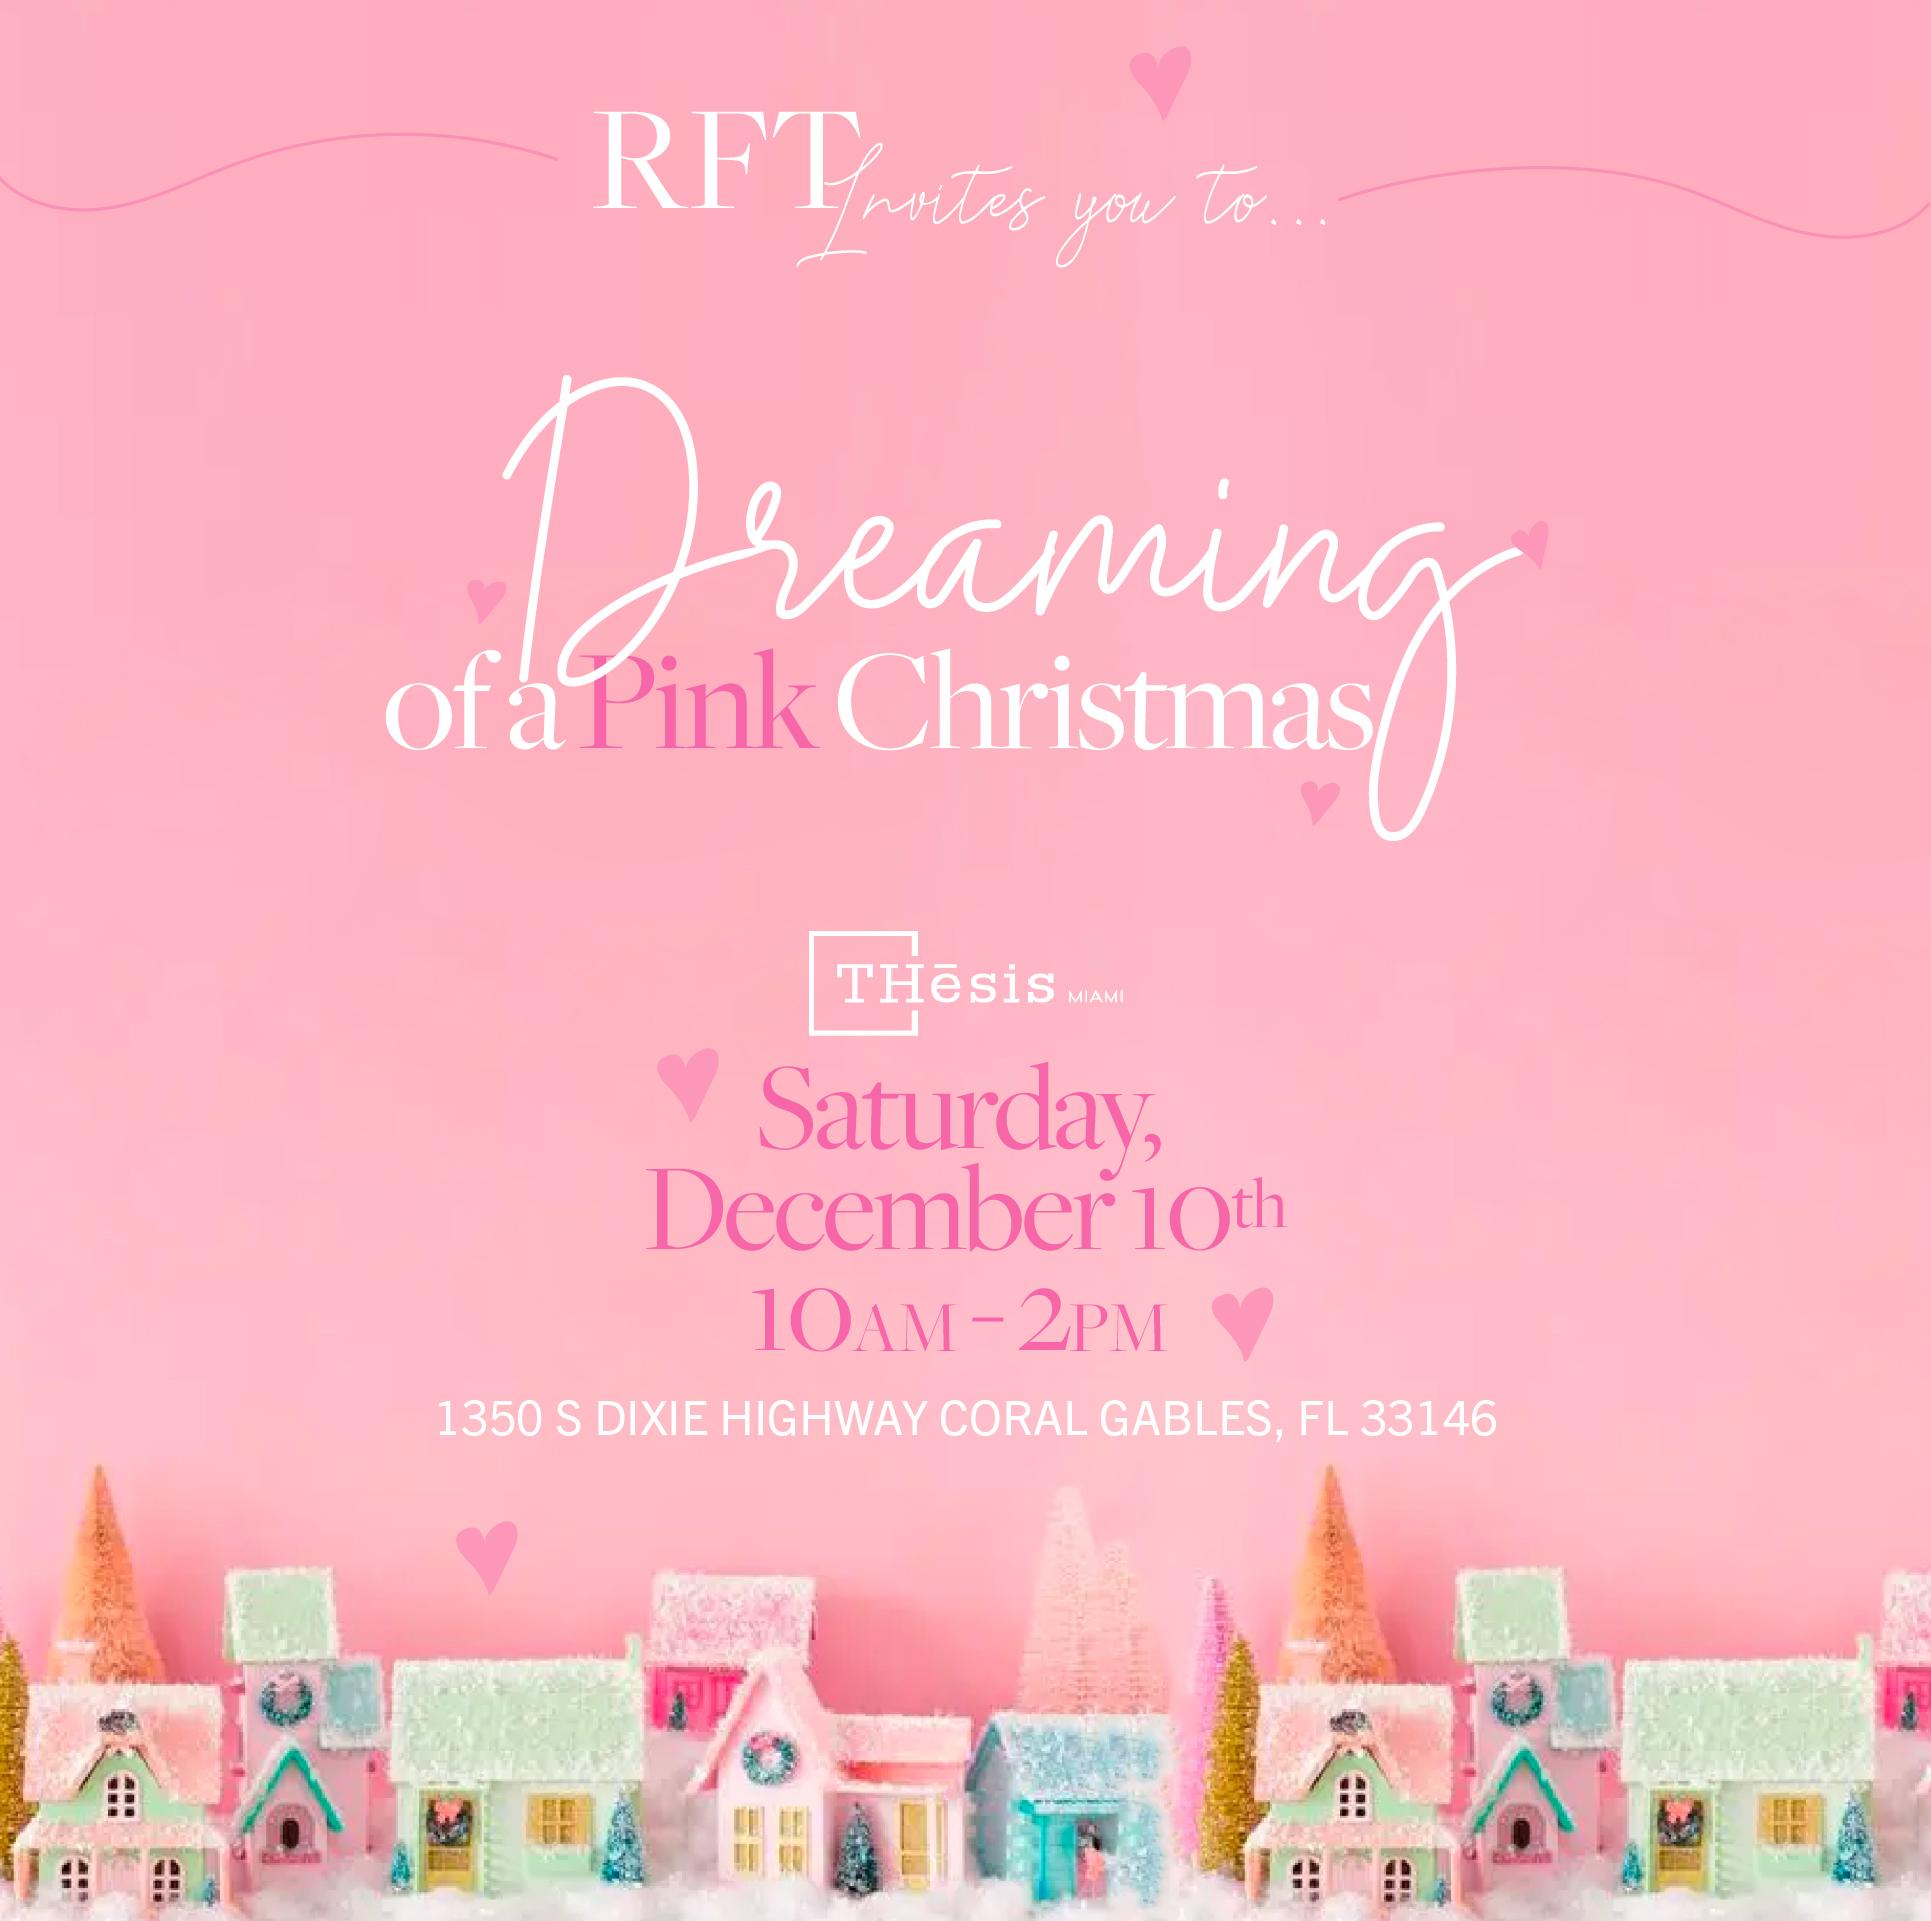 RFT Holiday Trunk Show at THesis